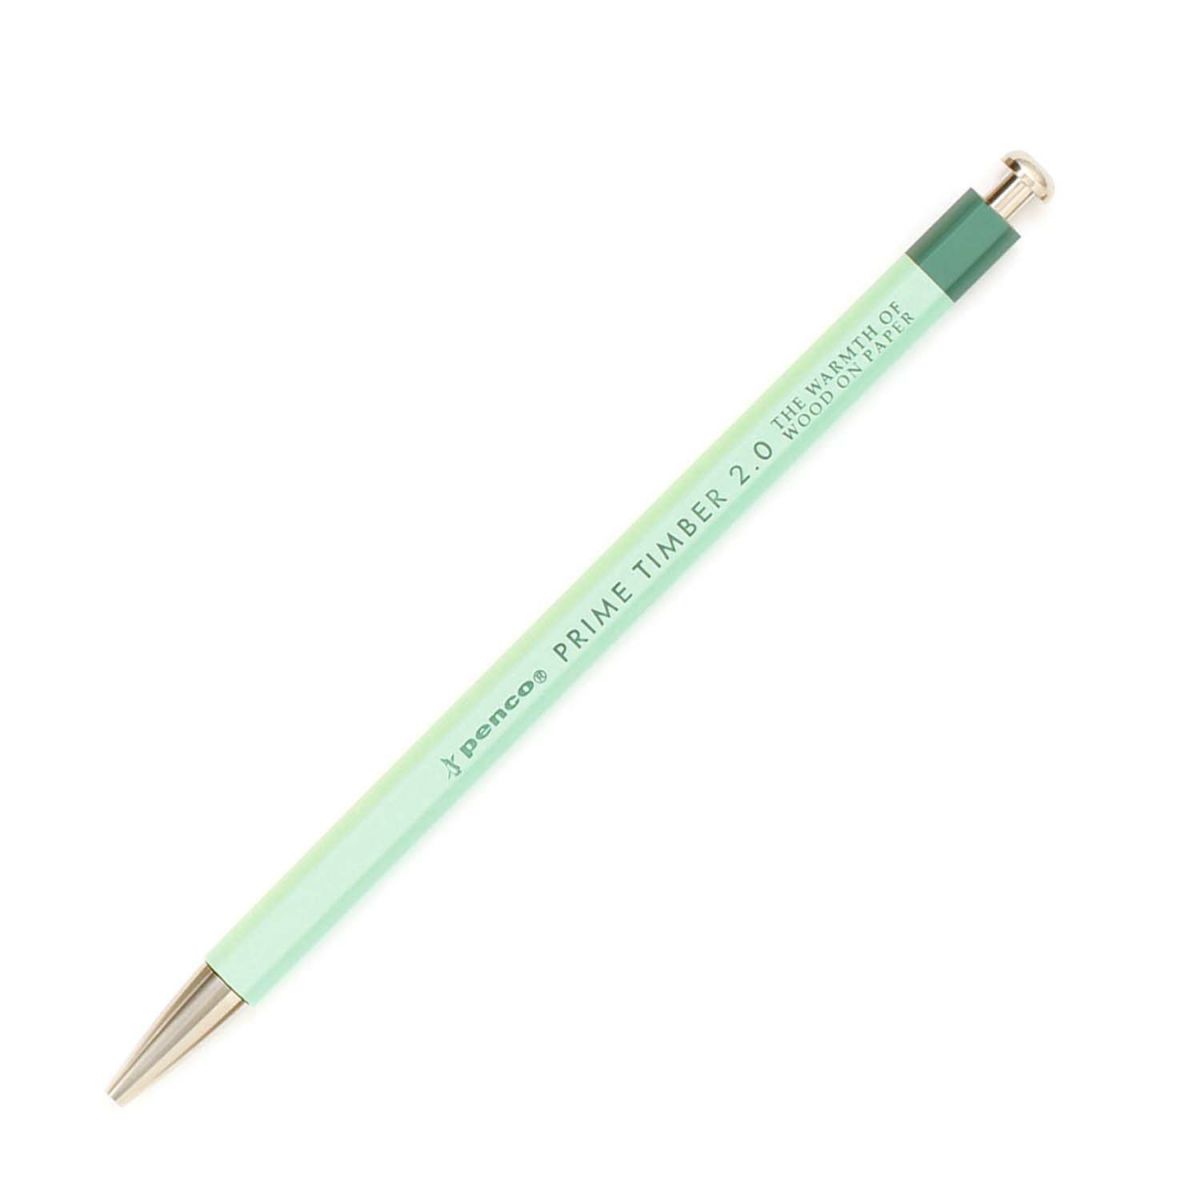 Prime Timber Pencil 2.0 // All Colors